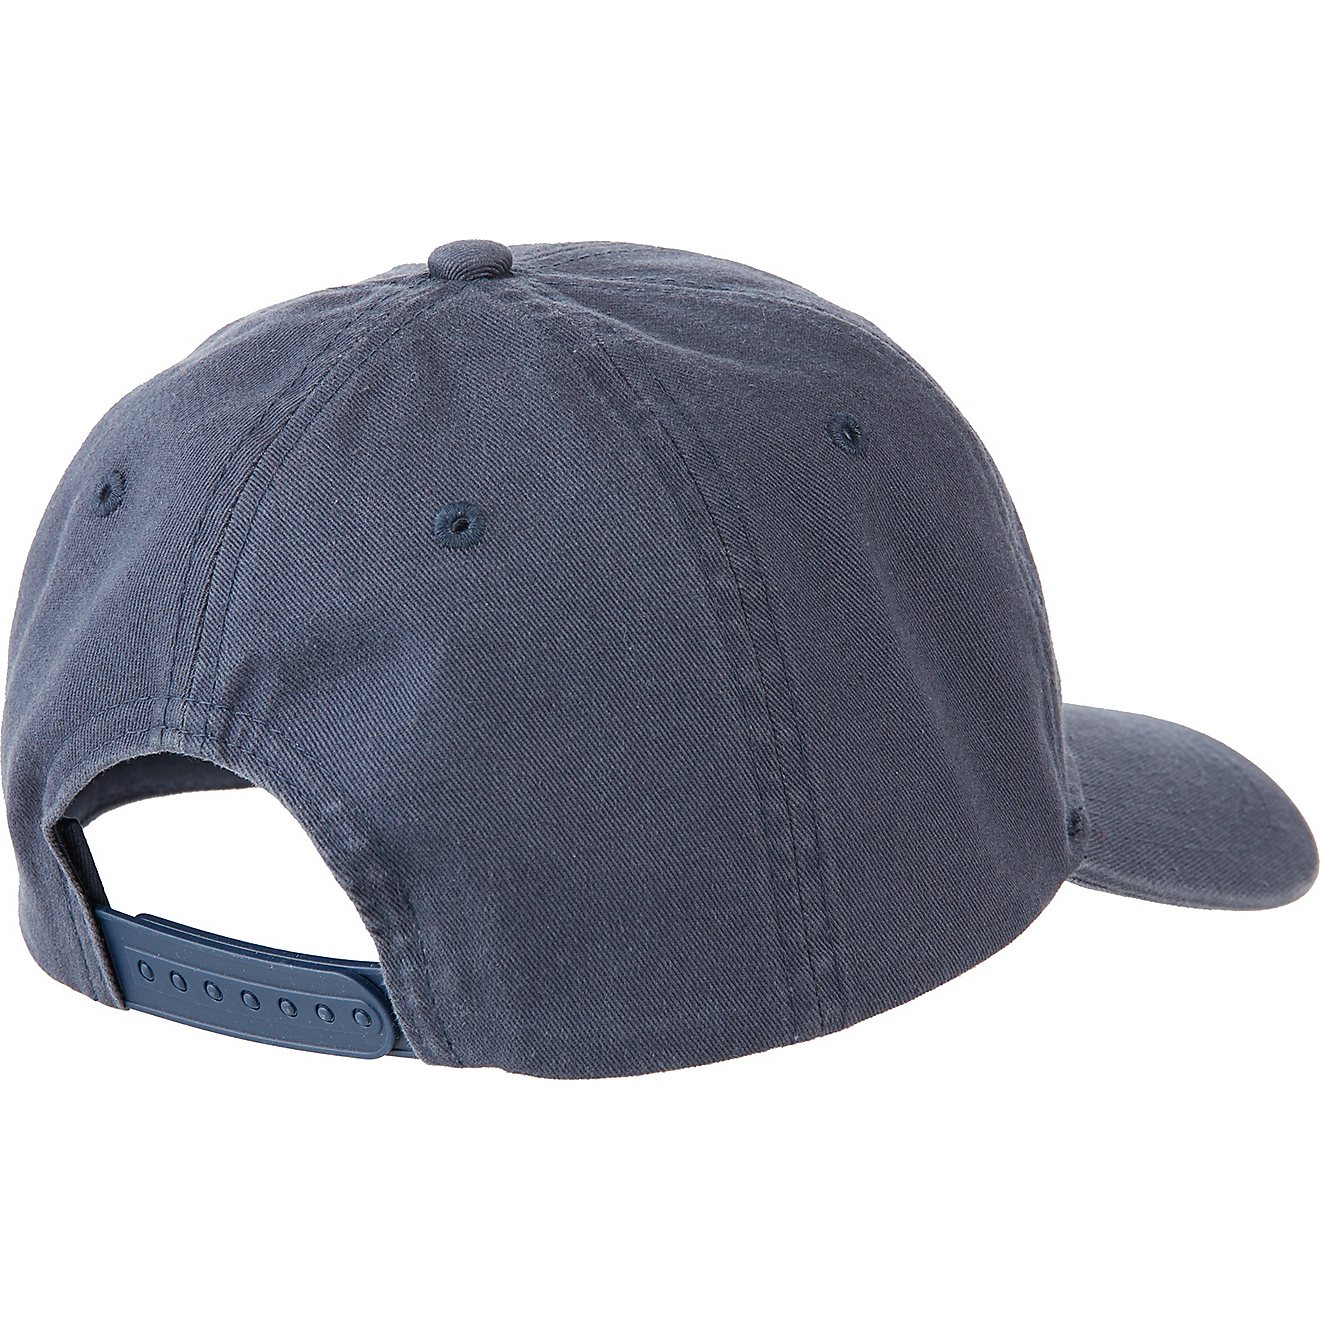 Academy Sports + Outdoors Men's Texas State Outline Cap                                                                          - view number 2